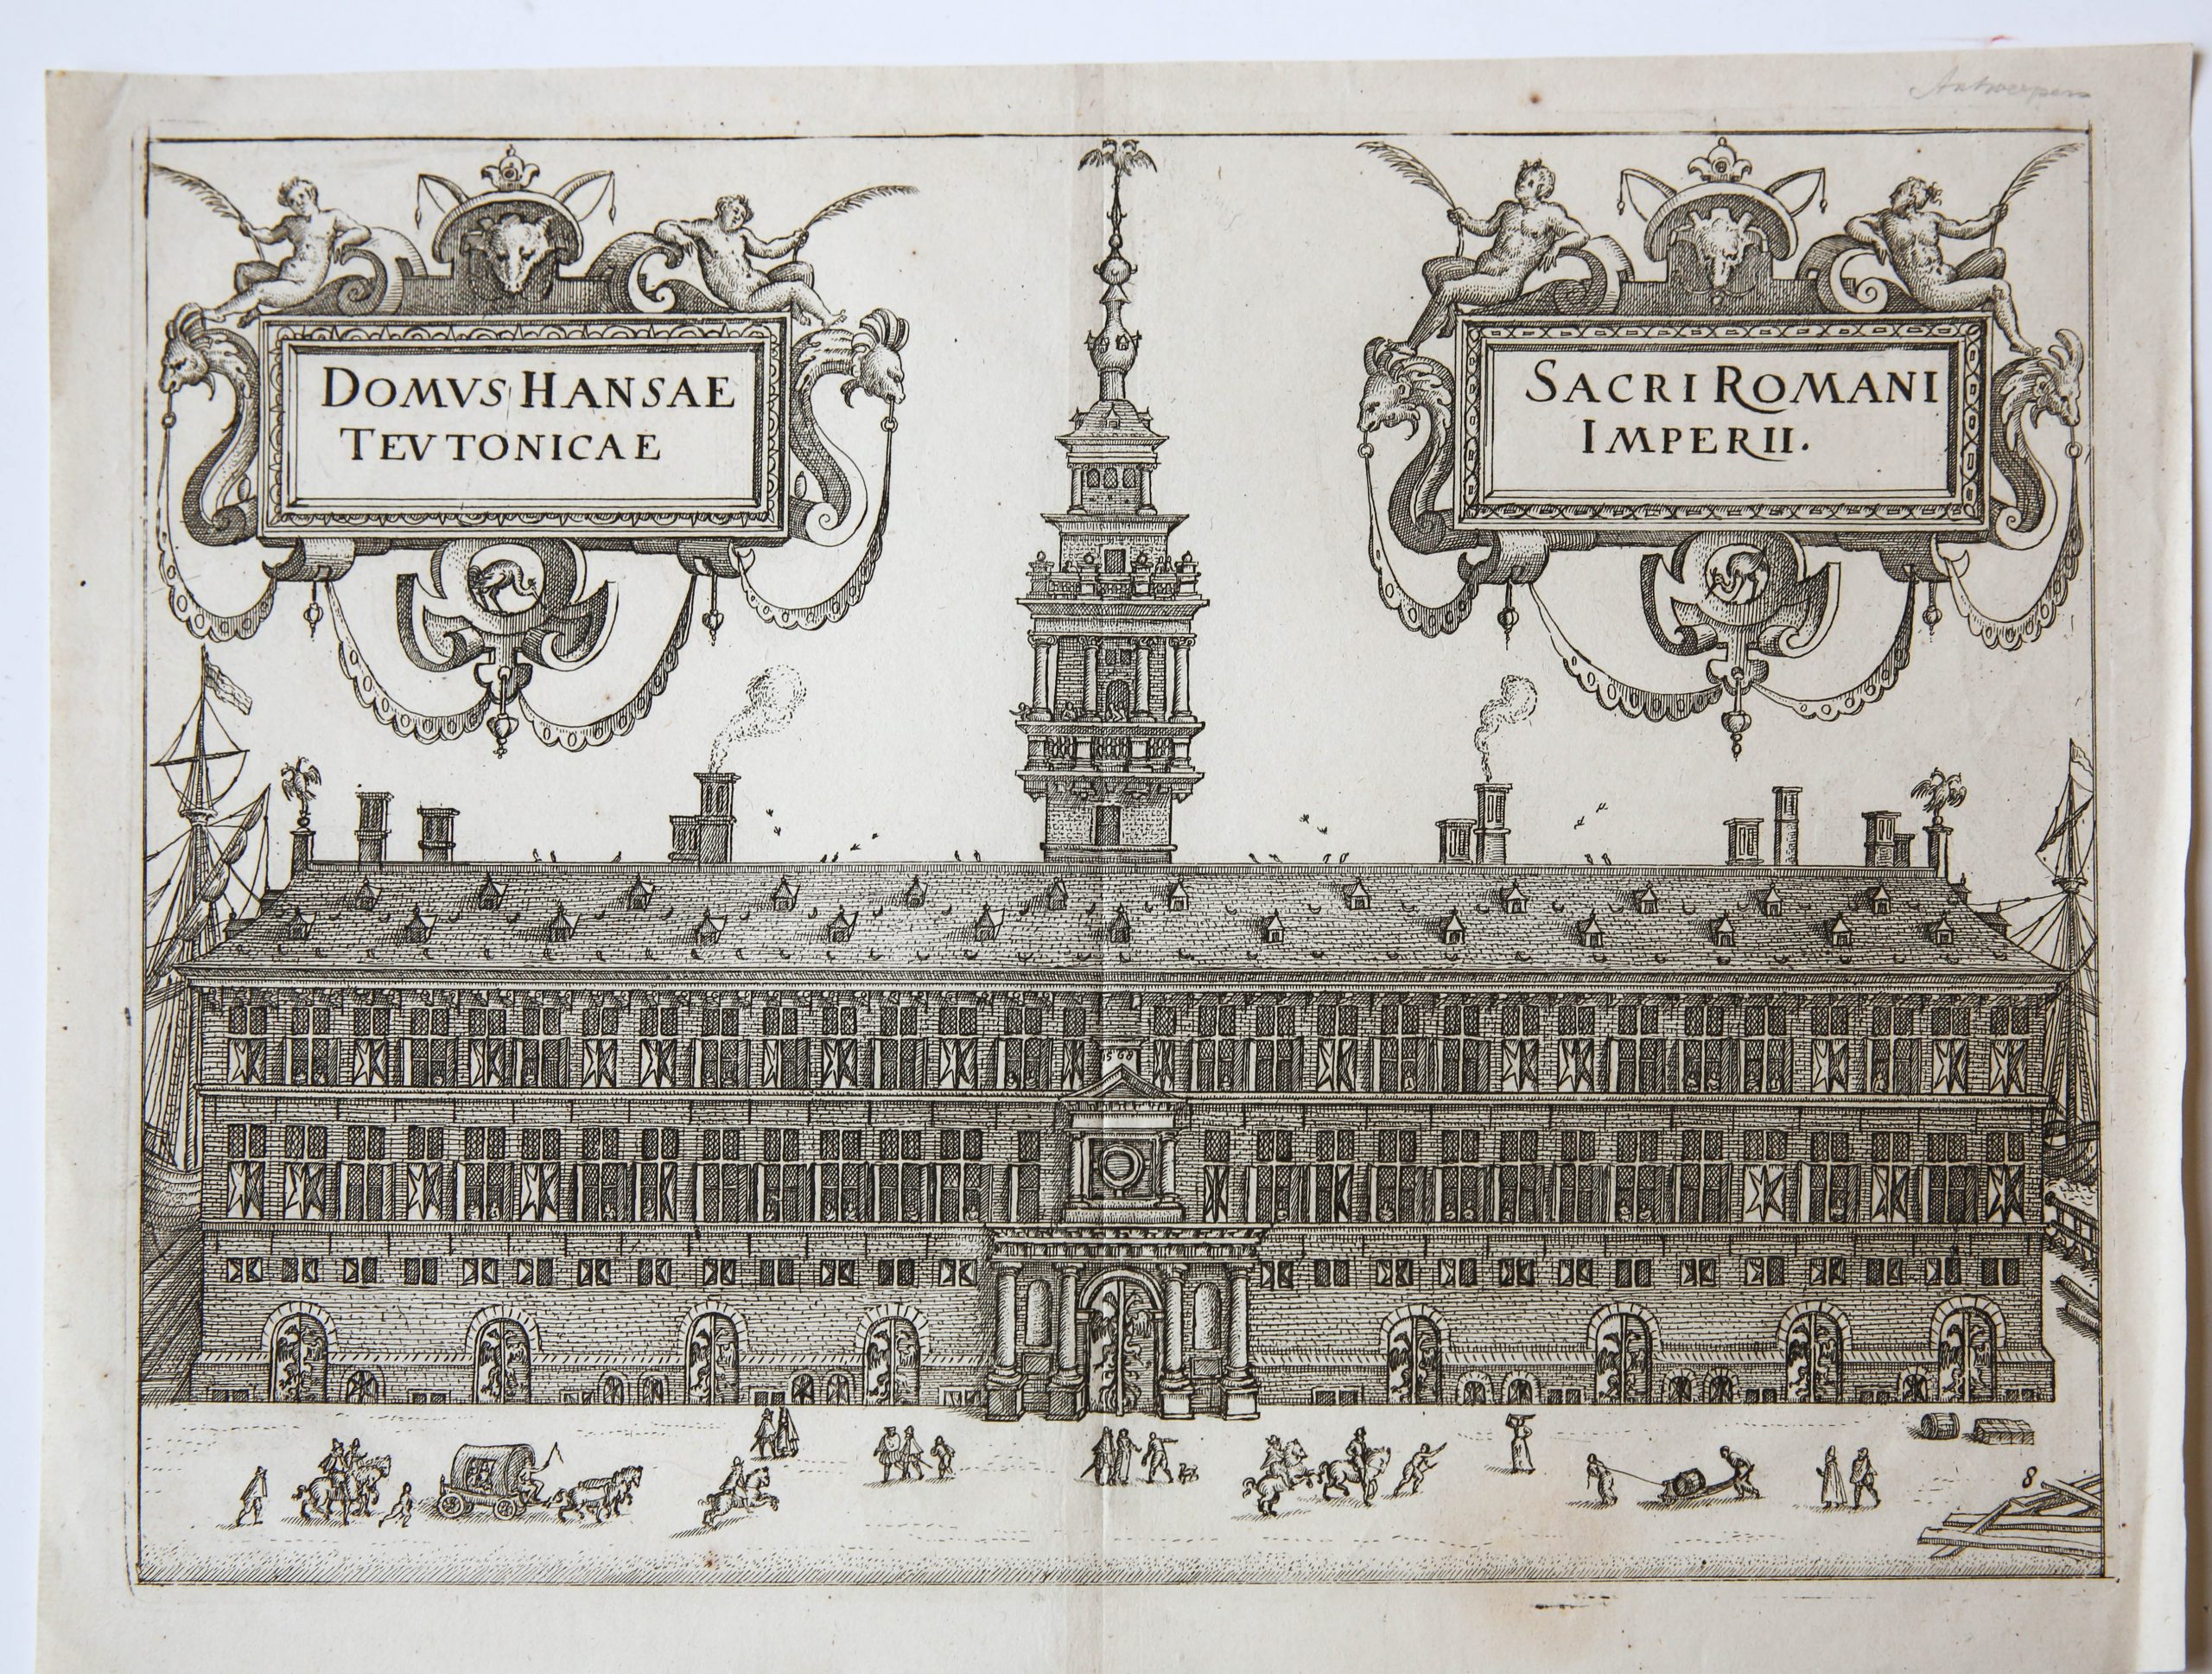 [Antique print, engraving] The Hanzehuis in Antwerp [the Eastern House]/Het Hanzehuis in Antwerpen, published 1612.